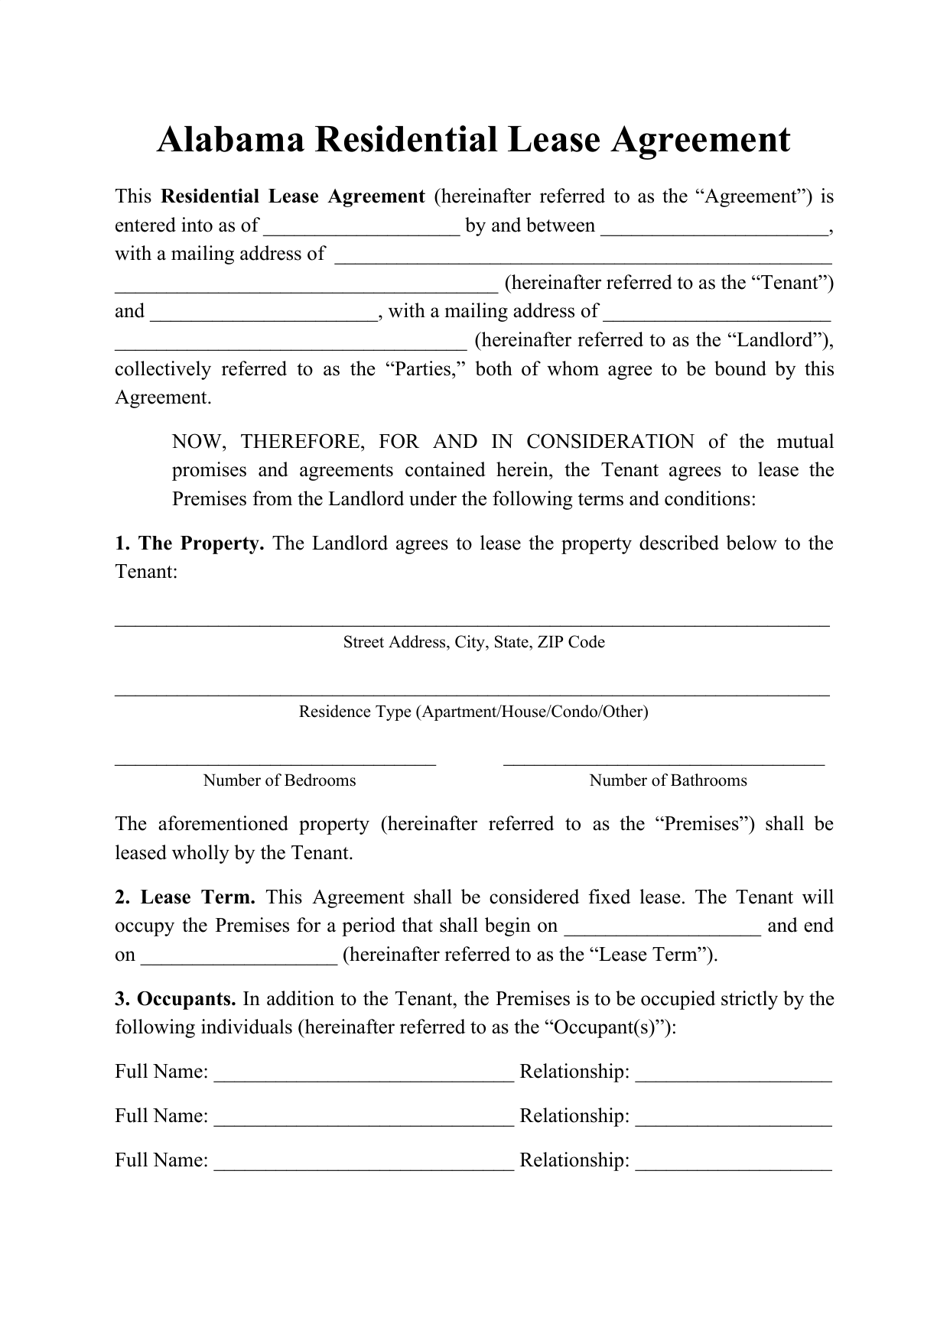 alabama residential lease agreement template download printable pdf